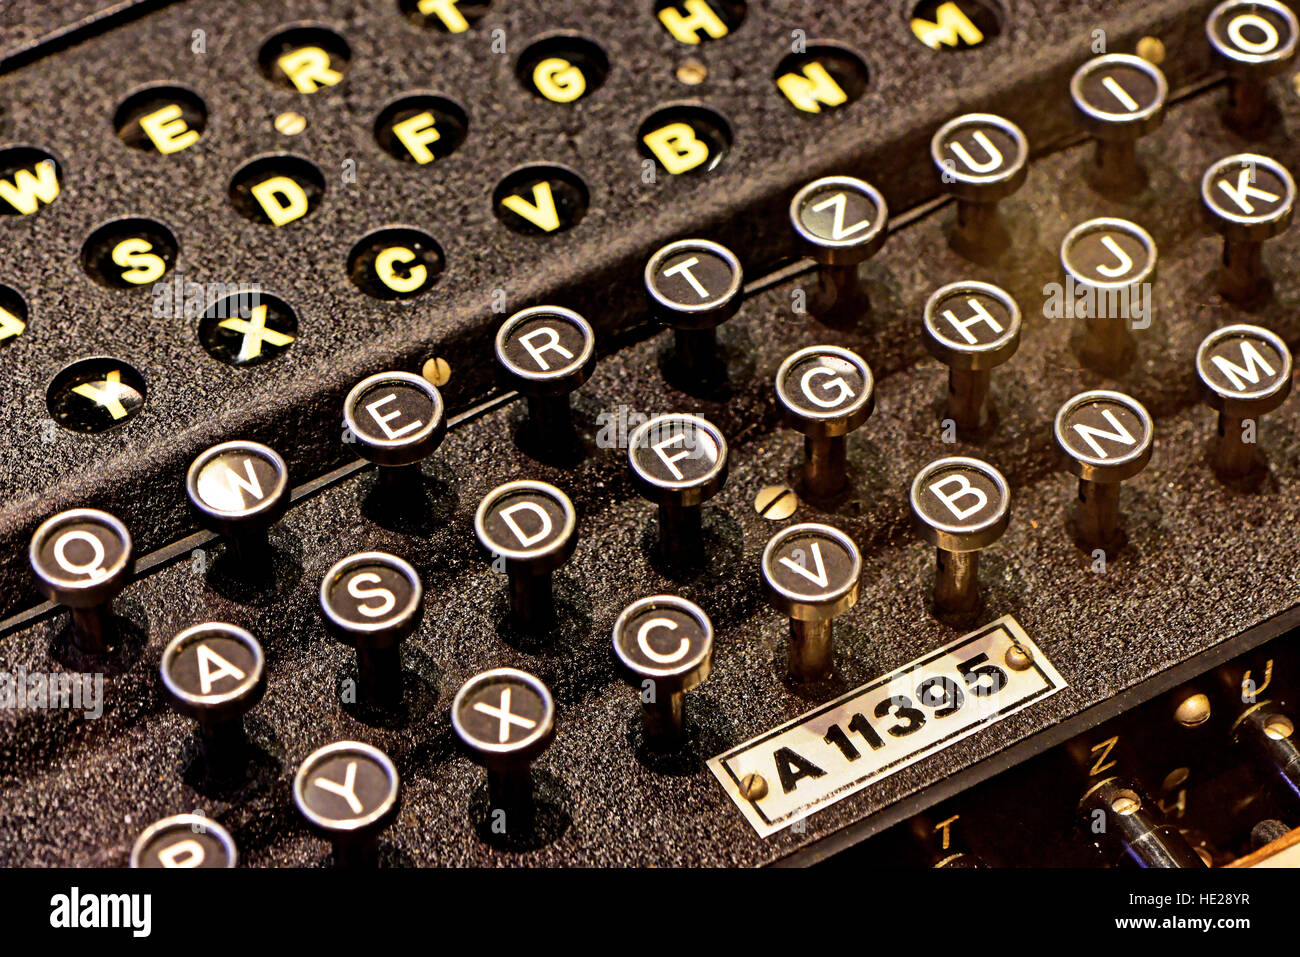 German Wwii Enigma Code Machine Keyboard At Discovery Museum Newcastle Stock Photo Alamy